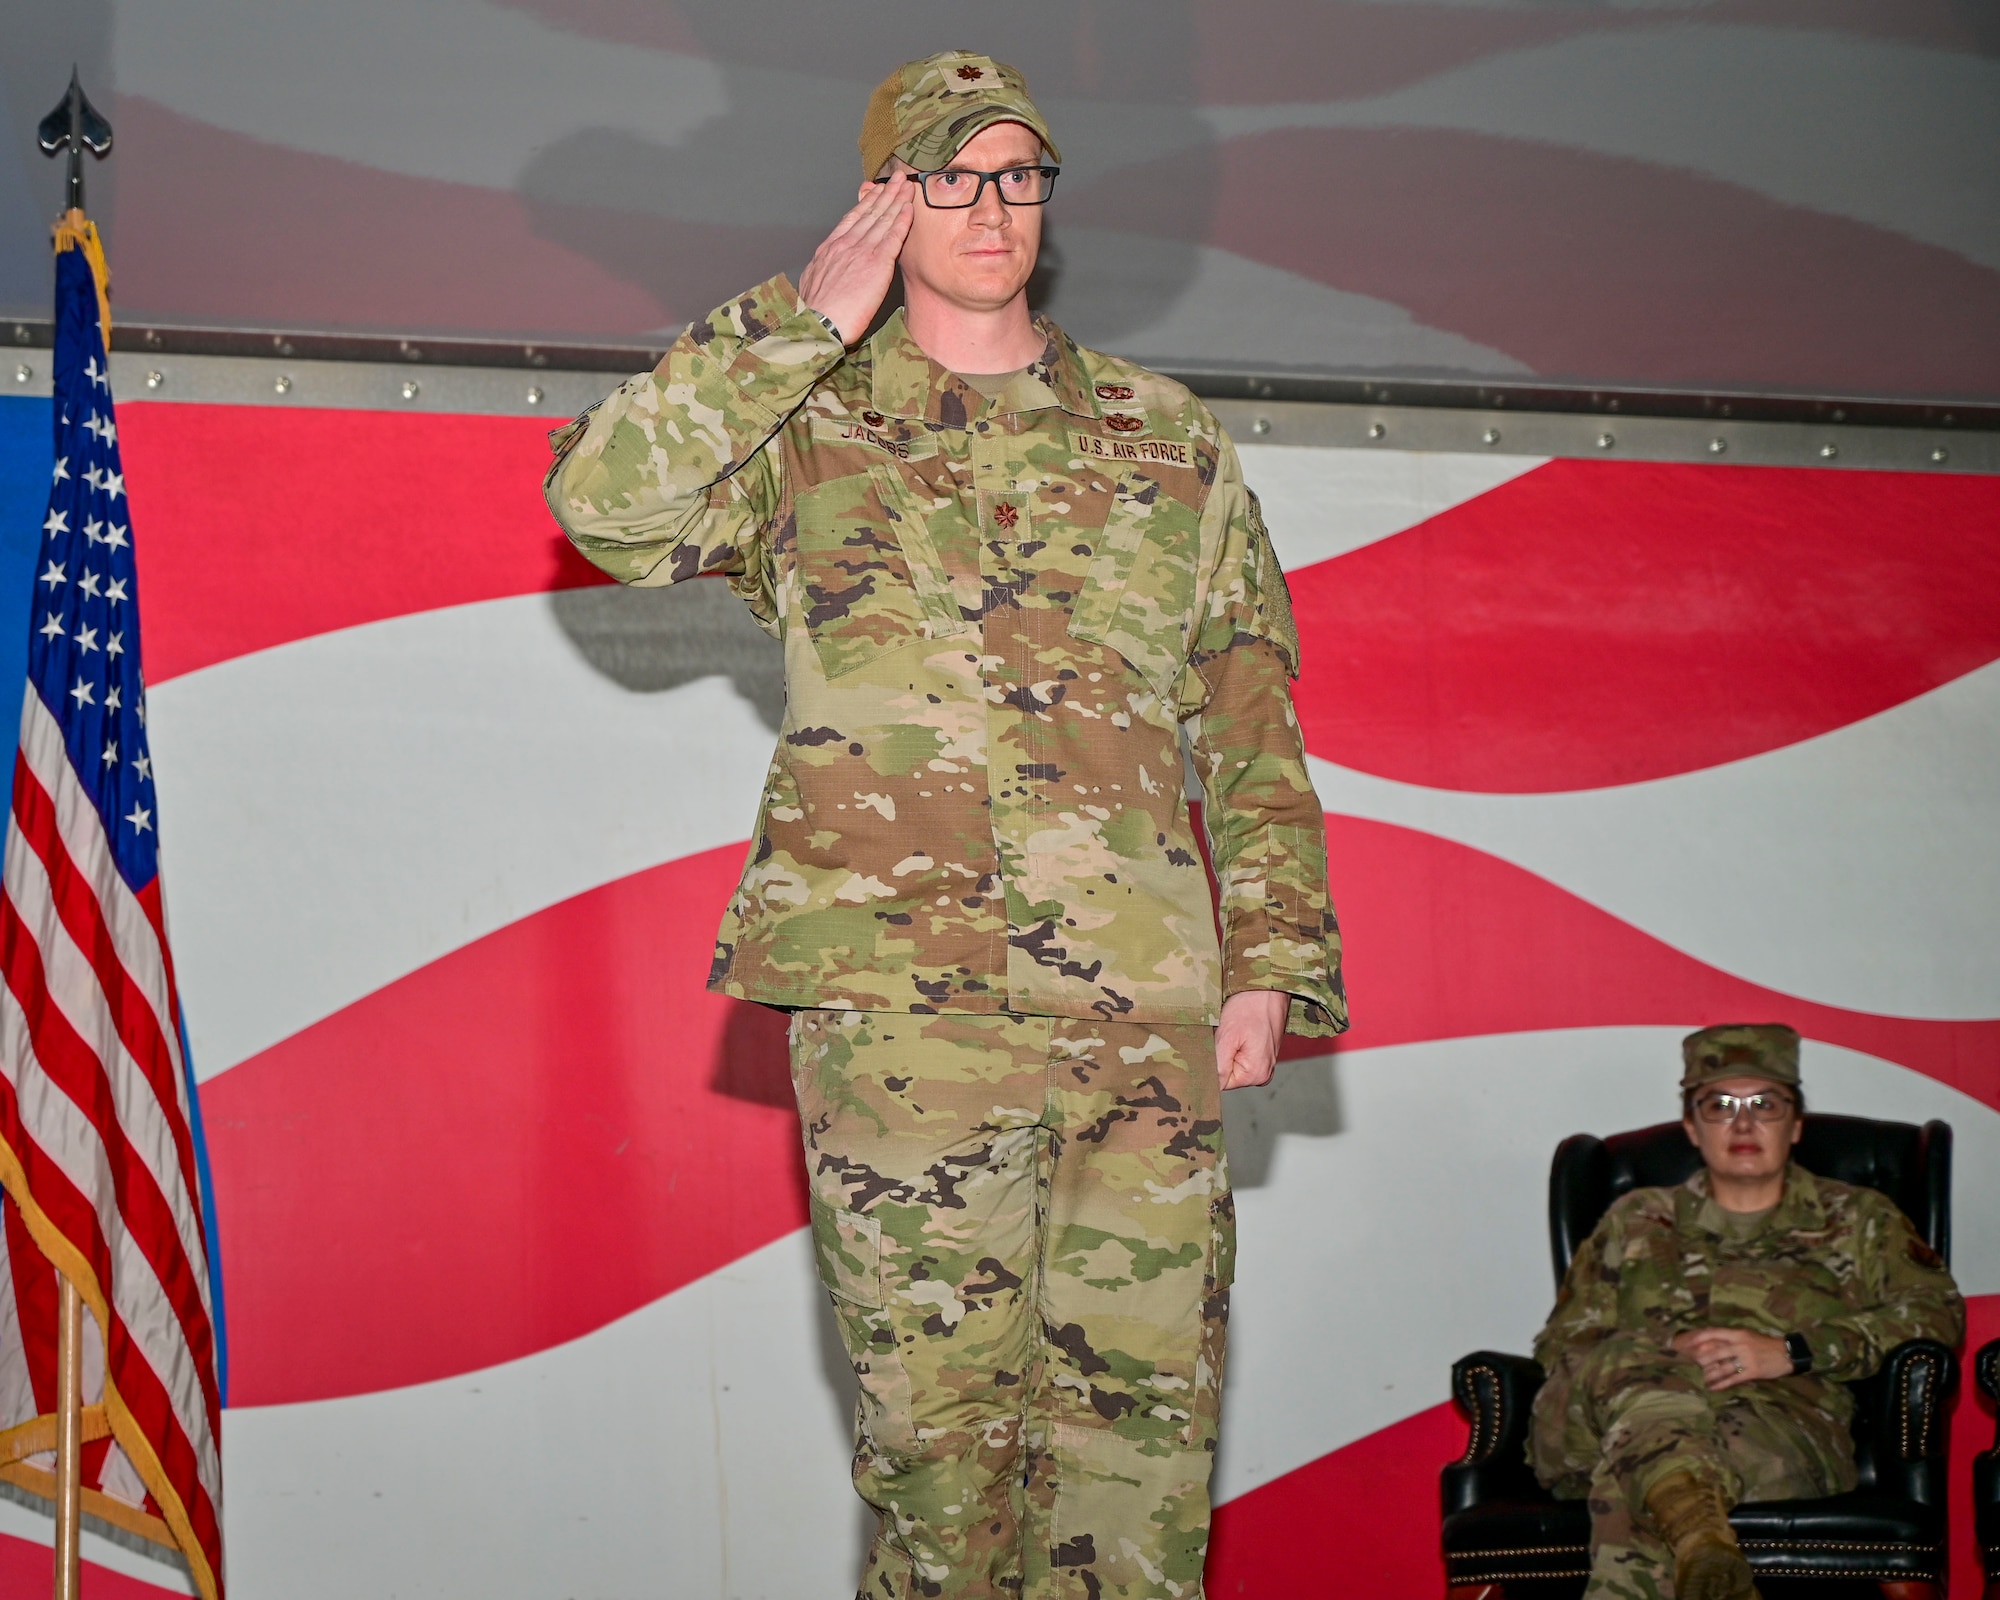 Maj. Jordan Jacobs, 4th Component Maintenance Squadron incoming commander, salutes service members during a change of command ceremony at Seymour Johnson Air Force Base, North Carolina, March 3, 2023. The 4th CMS was established in December 1957. (U.S. Air Force photo by Staff Sgt. Sean Martin)